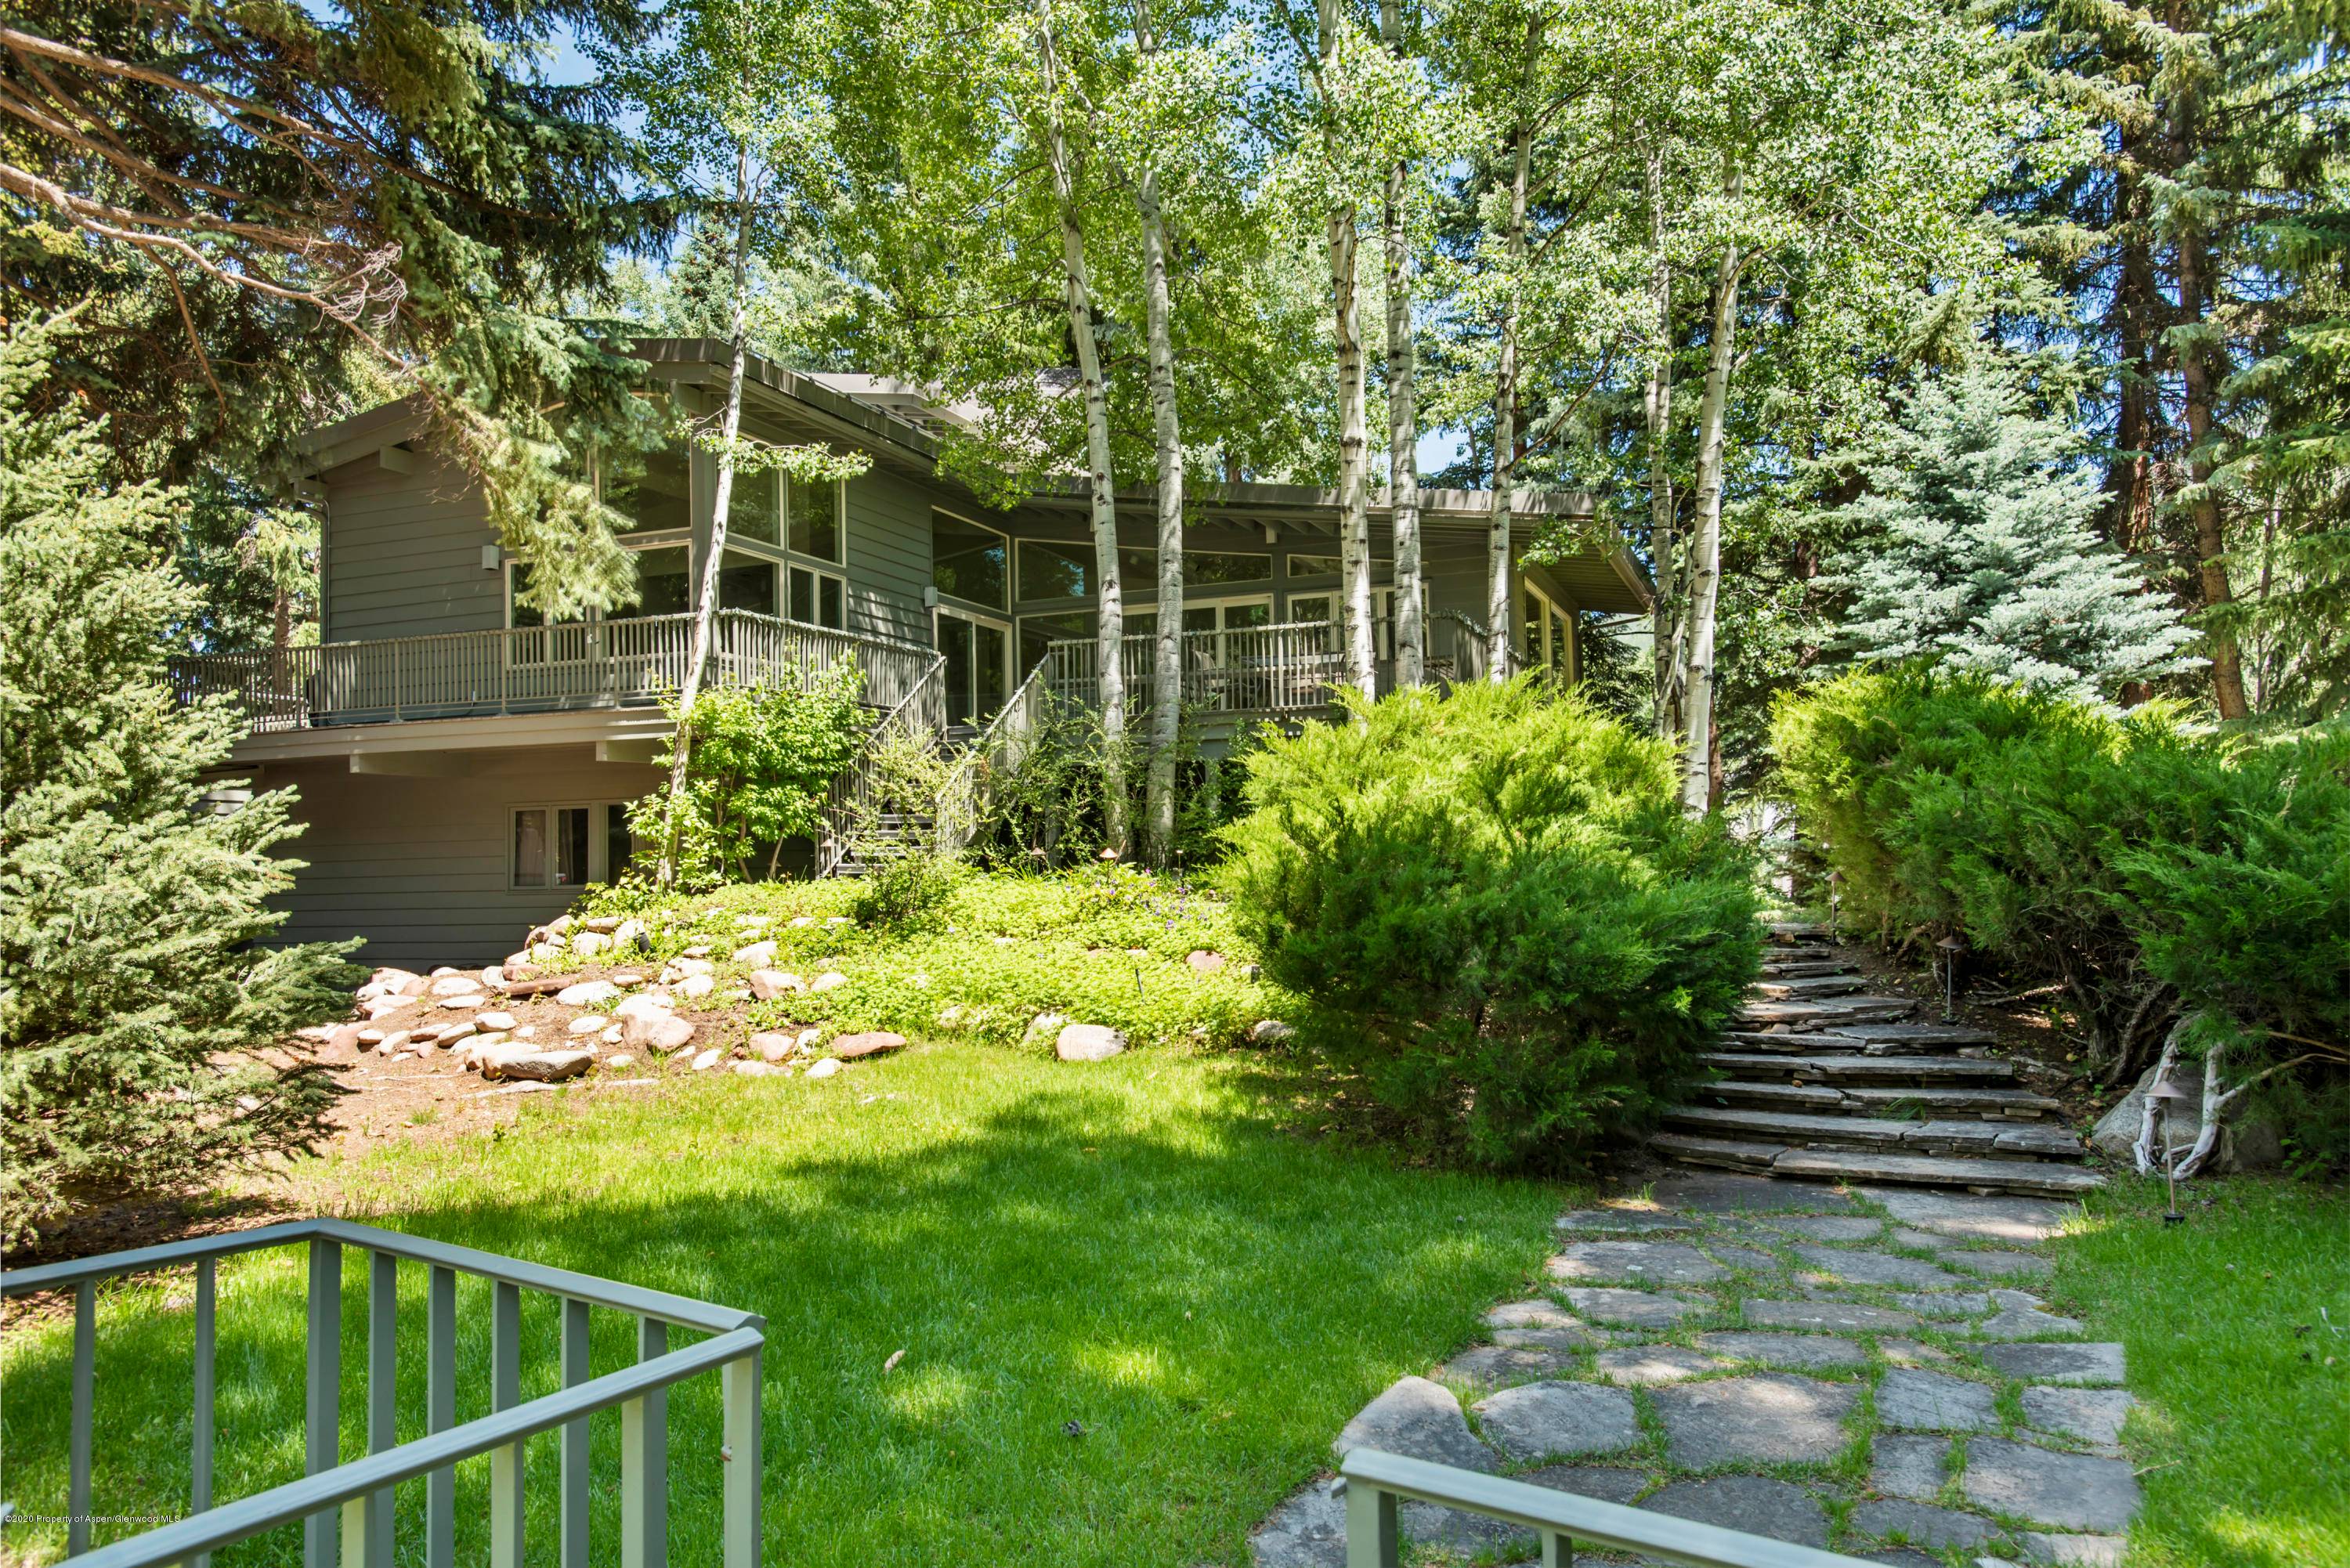 This gem sits on a large secluded lot located in Aspen's West End, one block from the Aspen Institute and Aspen Music Festival.